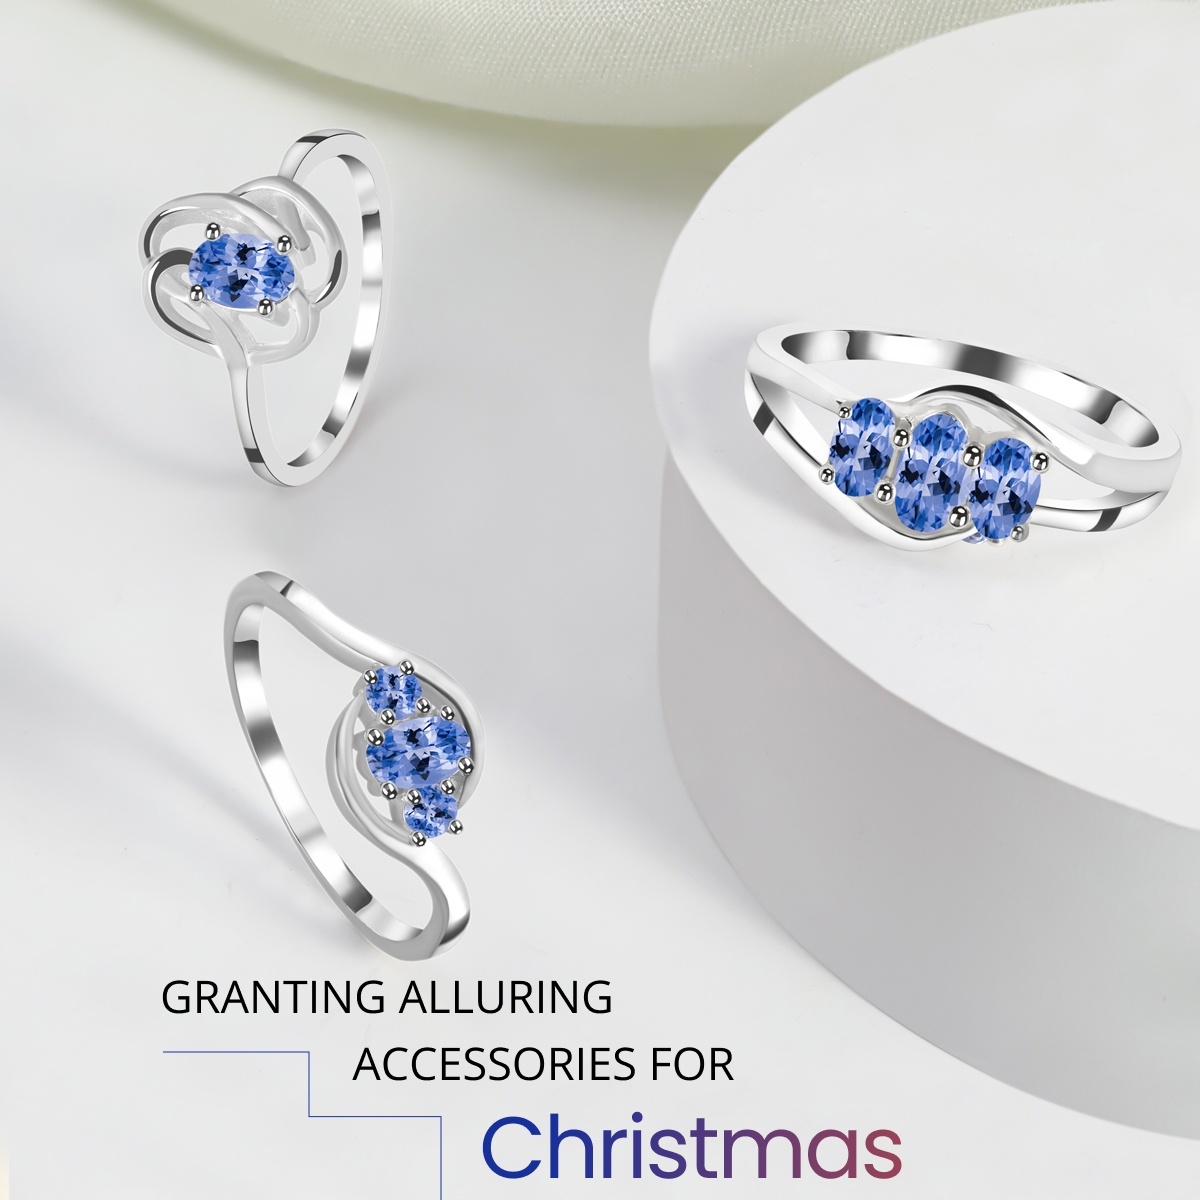 Granting Alluring Accessories For Christmas